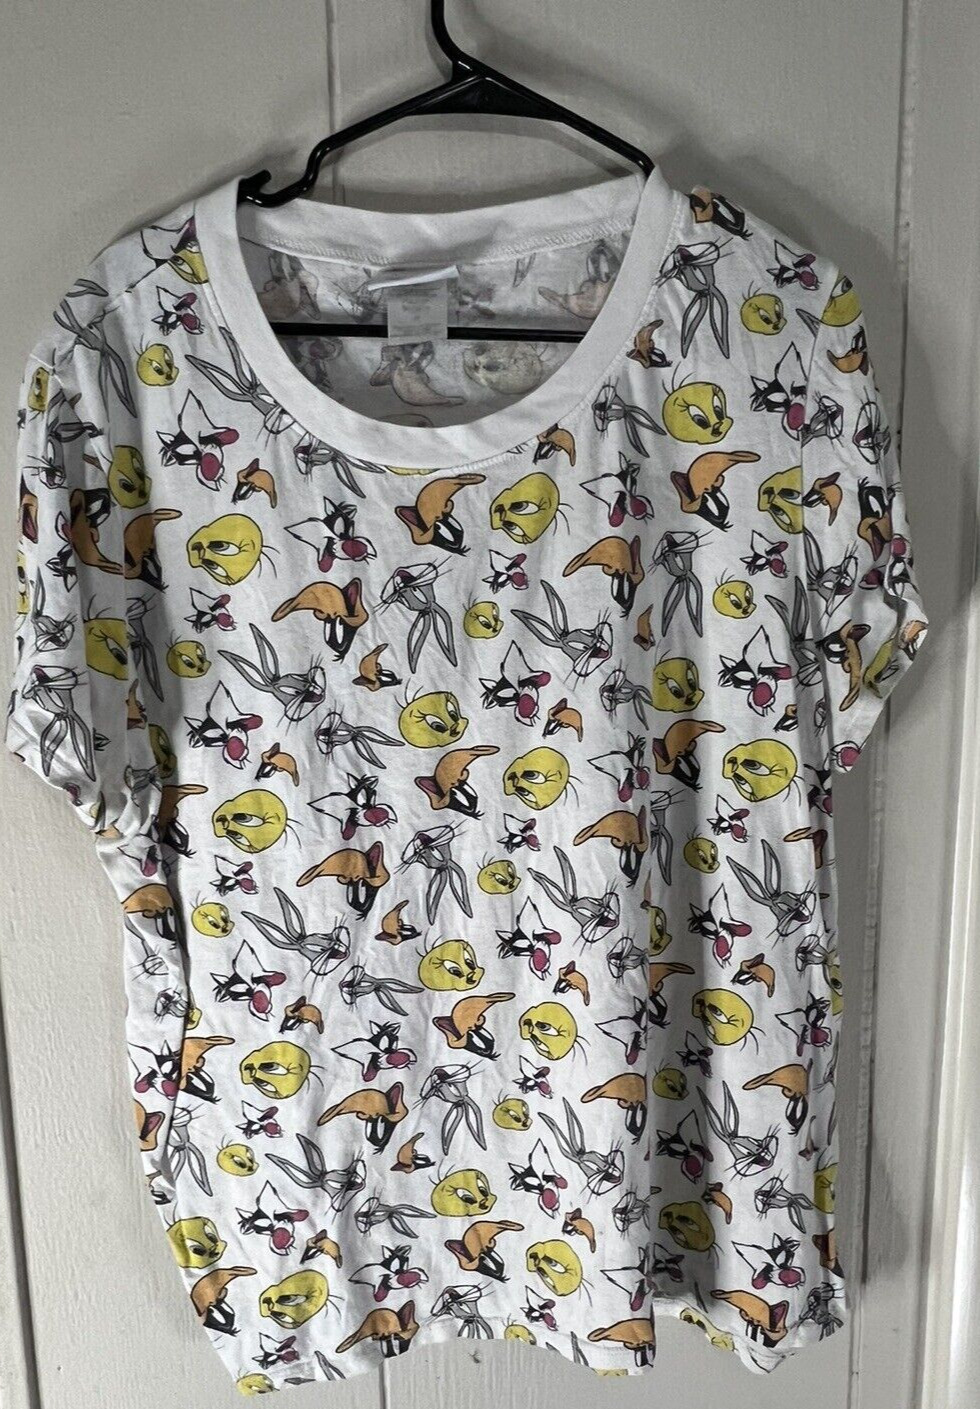 Loony Toons Size 2x Tweety Bugs And Sylvester Graphic Tshirt